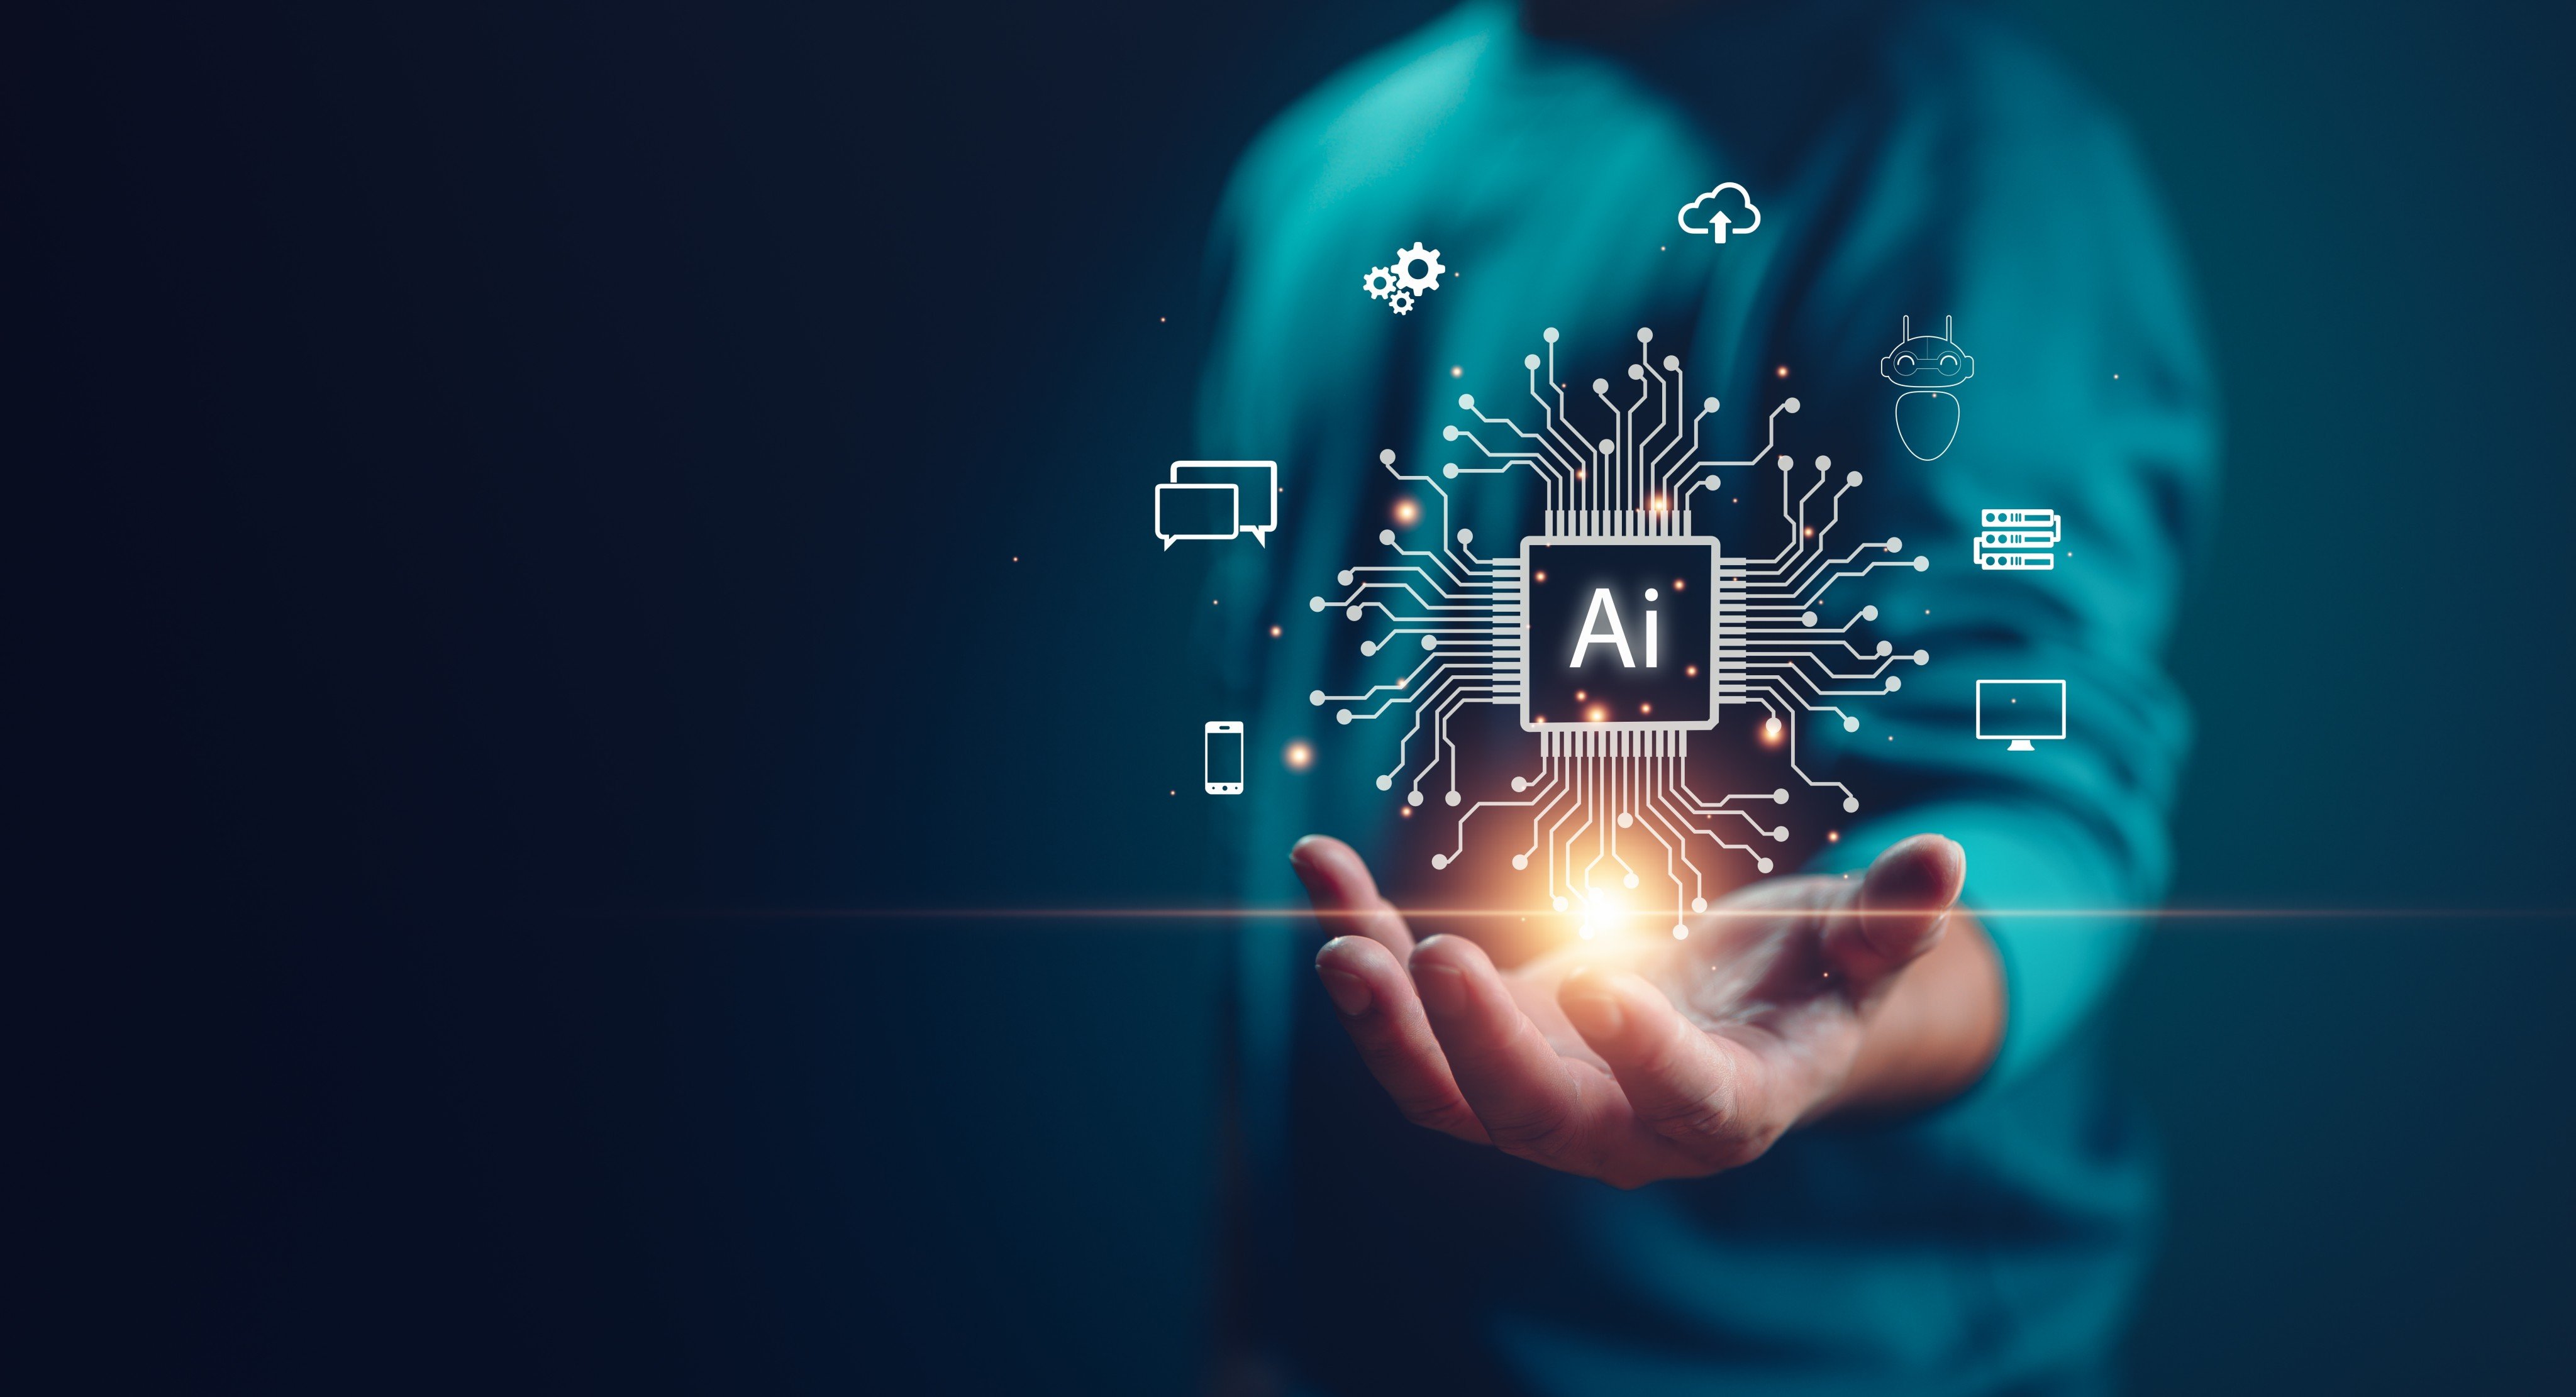 Some of the world’s biggest money managers are hunting for the next wave of artificial intelligence winners in emerging markets for better value and a bigger pool of options. Image: Shutterstock